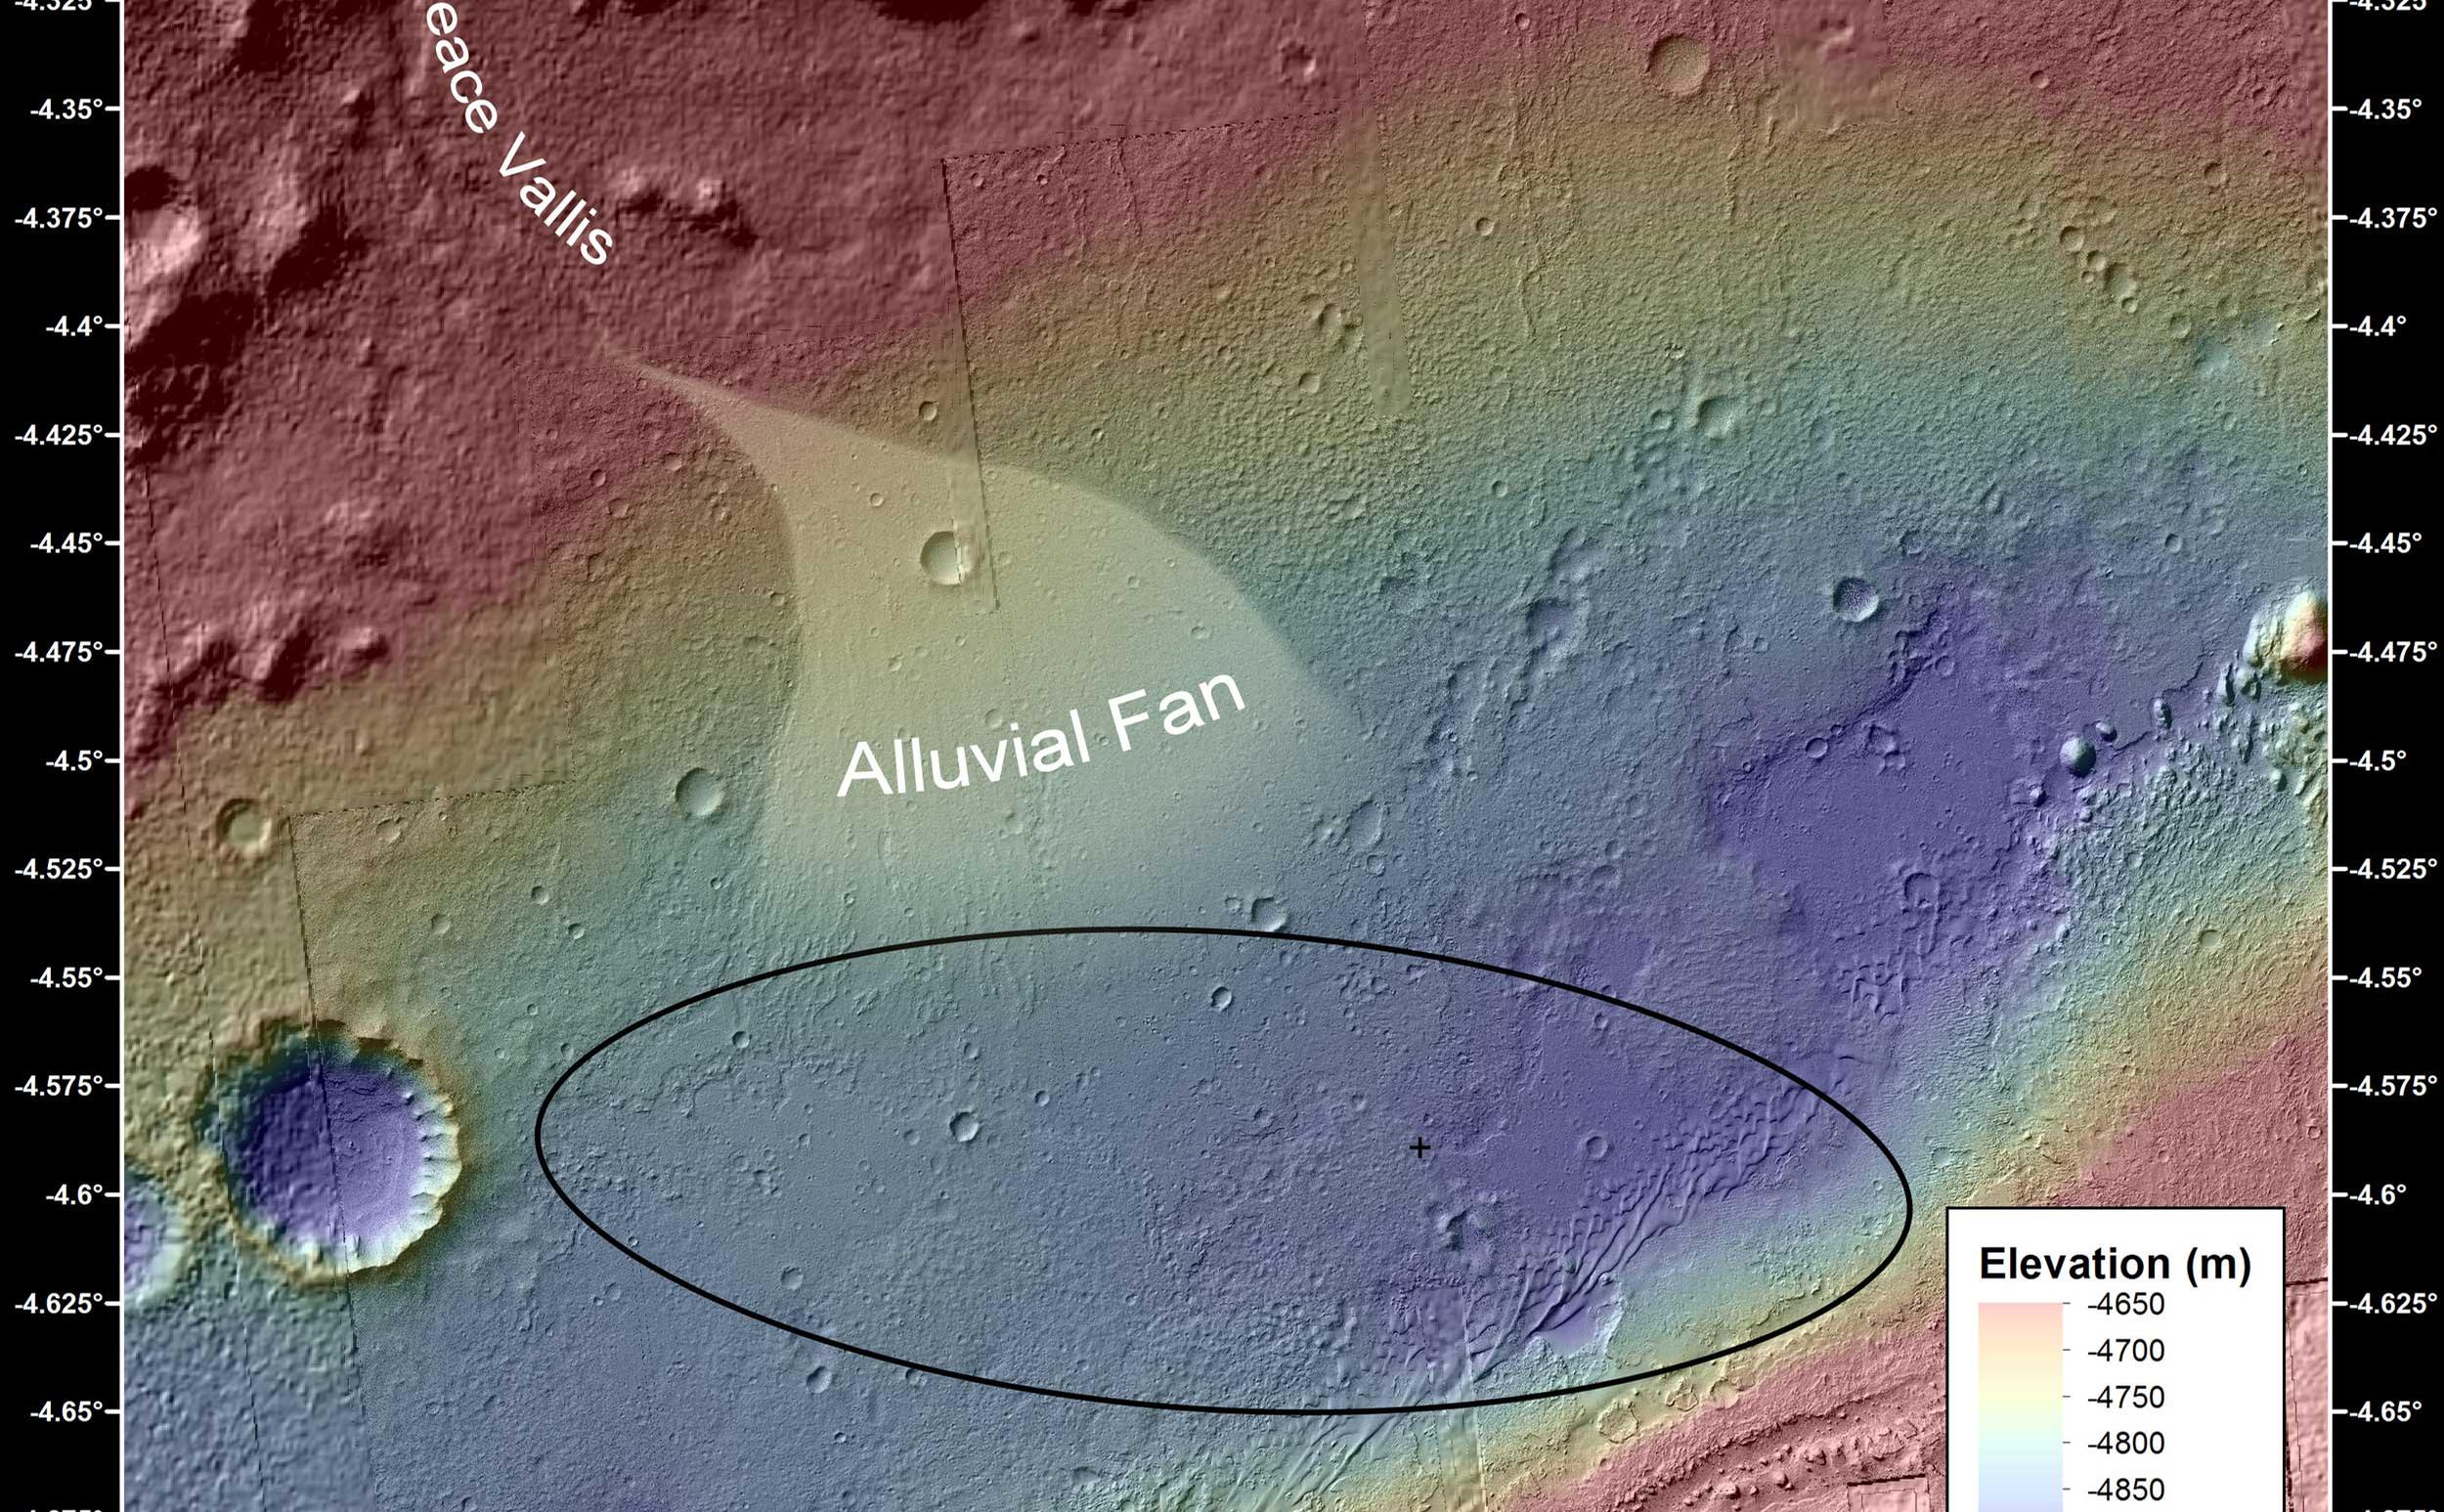 This image shows the topography, with shading added, around the area where NASA's Curiosity rover landed on Aug. 5 PDT (Aug. 6 EDT).